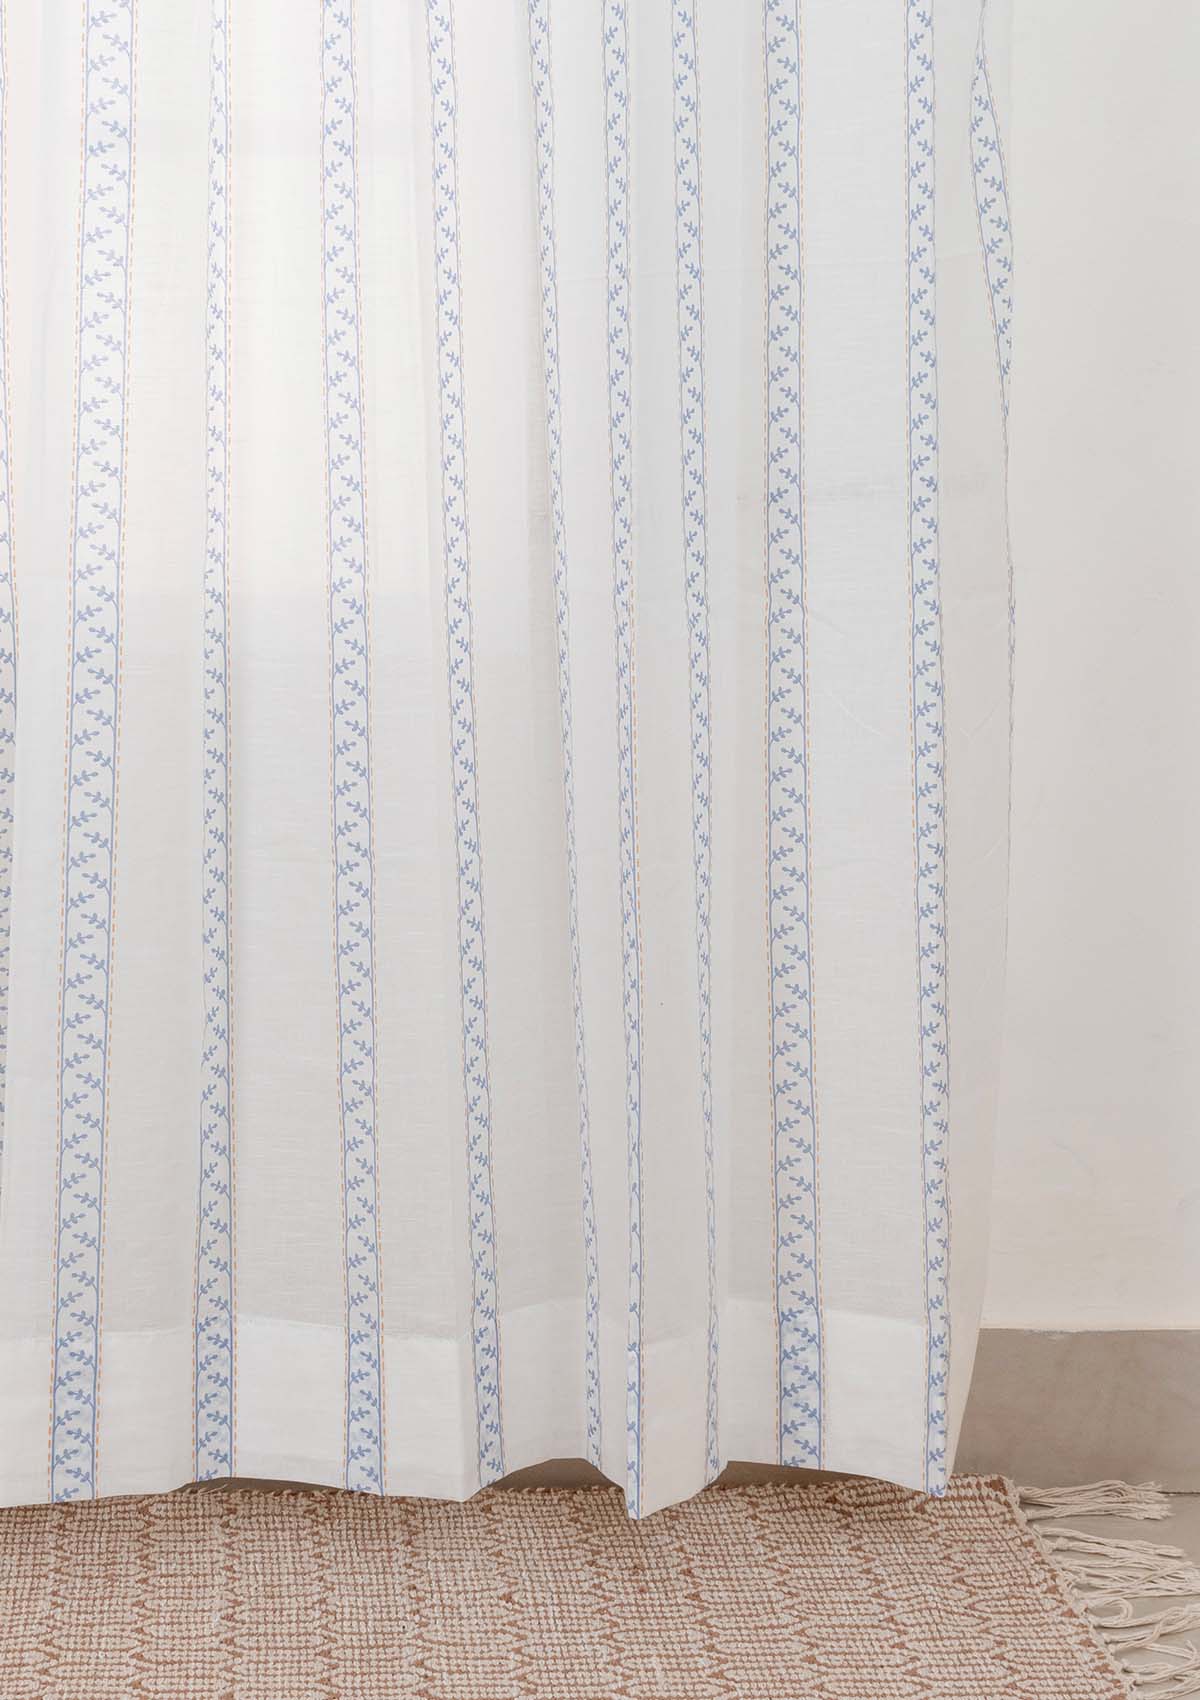 Oriental Stripes 100% Cotton Sheer Geometric curtain for Living room & bedroom - Light filtering - Powder Blue - Pack of 1